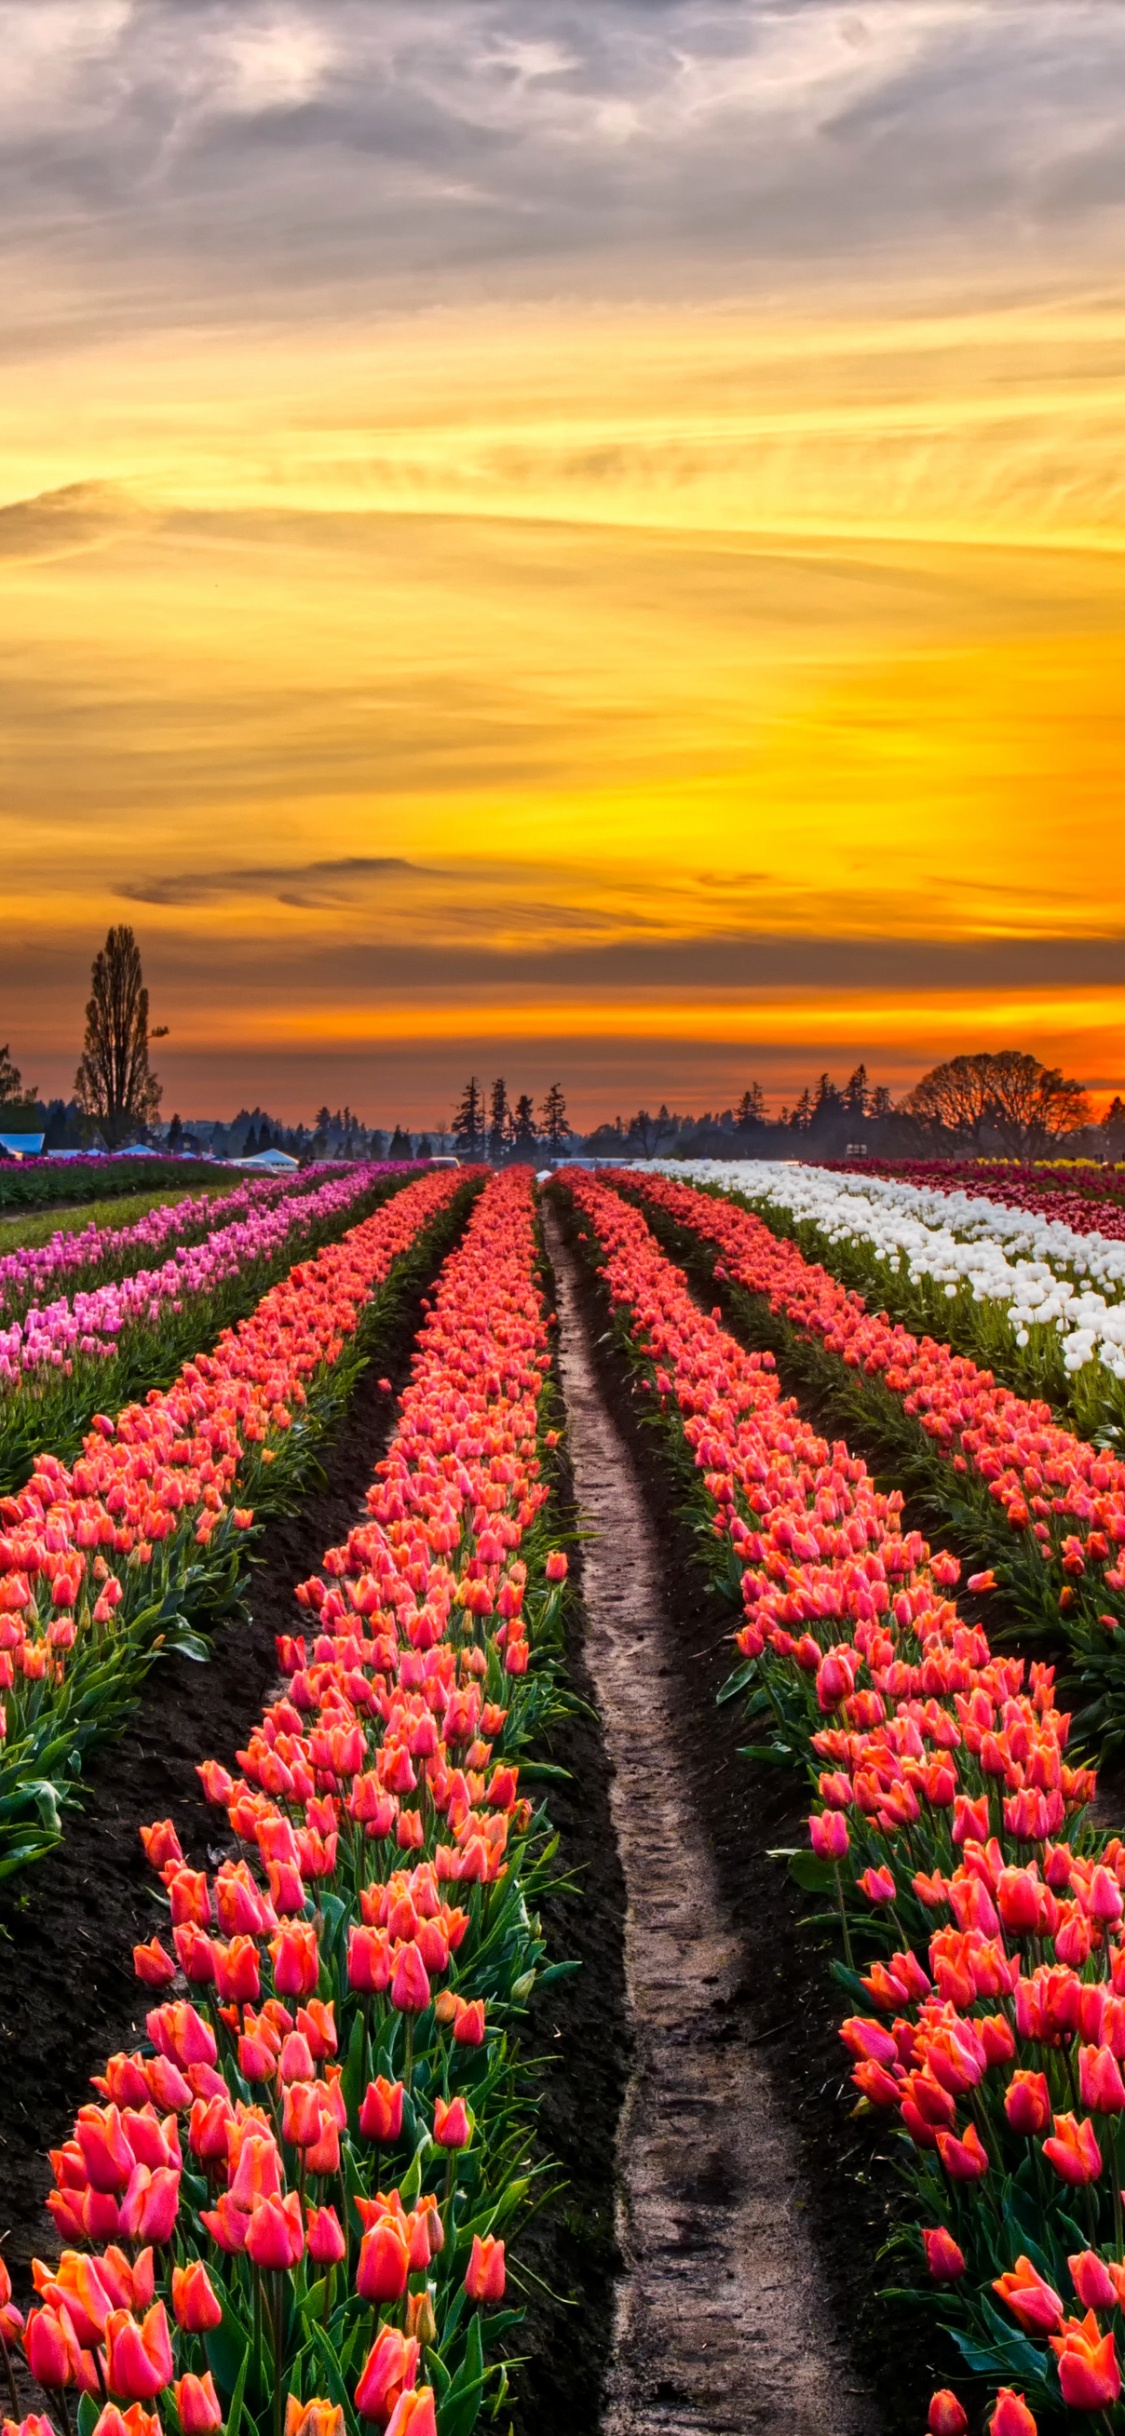 Pink and White Flower Field During Sunset. Wallpaper in 1125x2436 Resolution